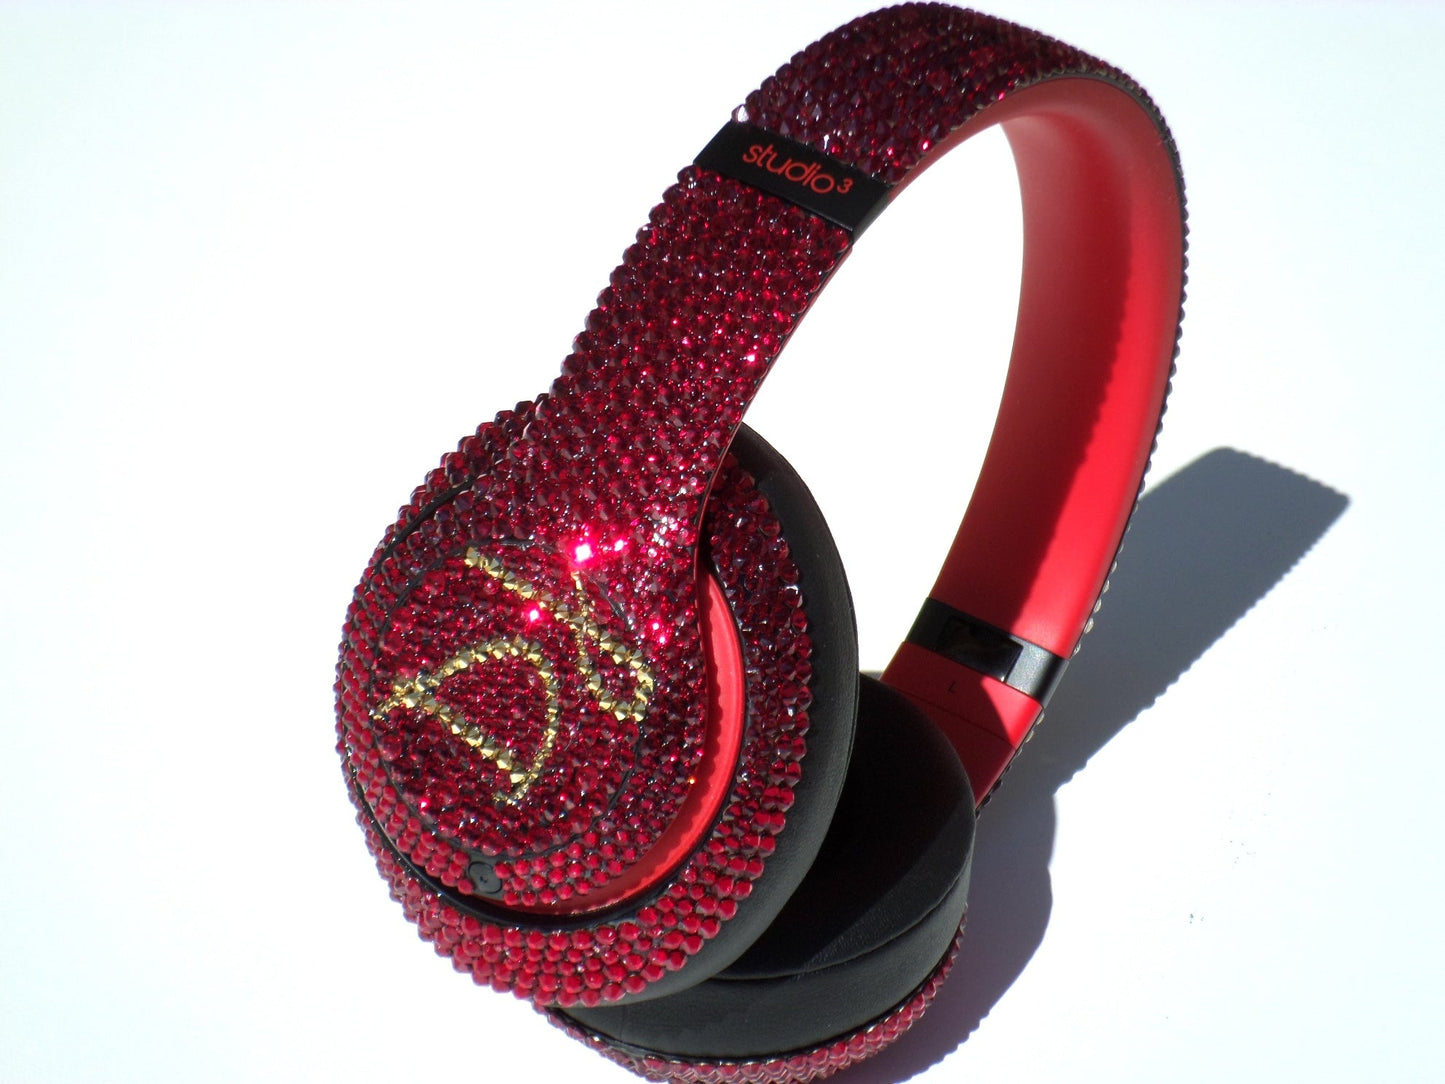 DJ Headphones Red Bedazzled Bling Beats Headphones custom crystallized with Swarovski Crystals or Premium Glass Rhinestones  | ICY Couture 